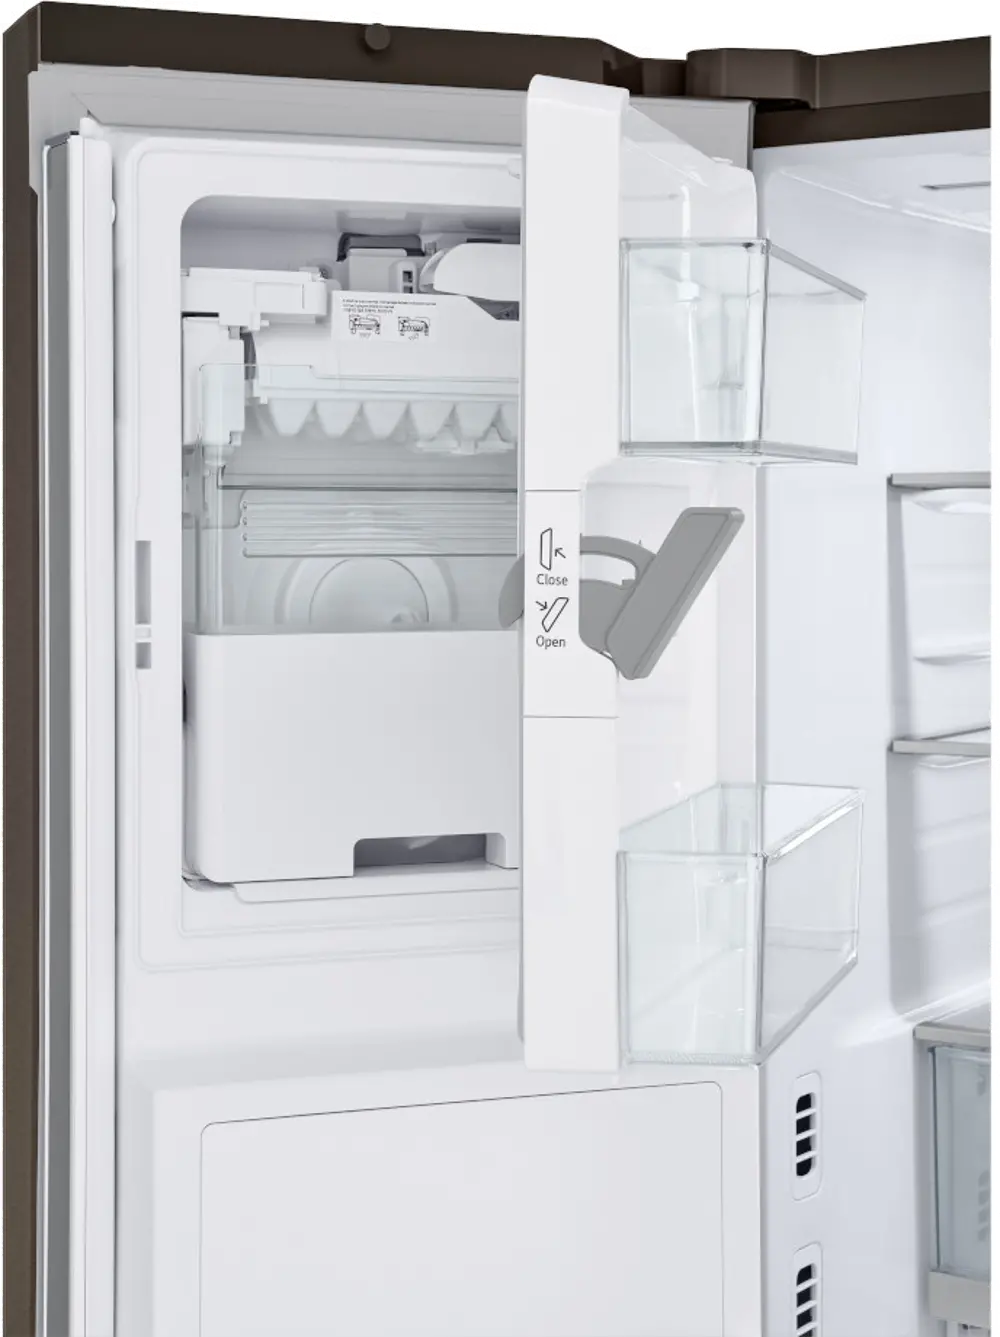 LRYKS3106D LG 30.7 Cu Ft French Door Refrigerator with Mirror InstaView® - Black Stainless Steel-1